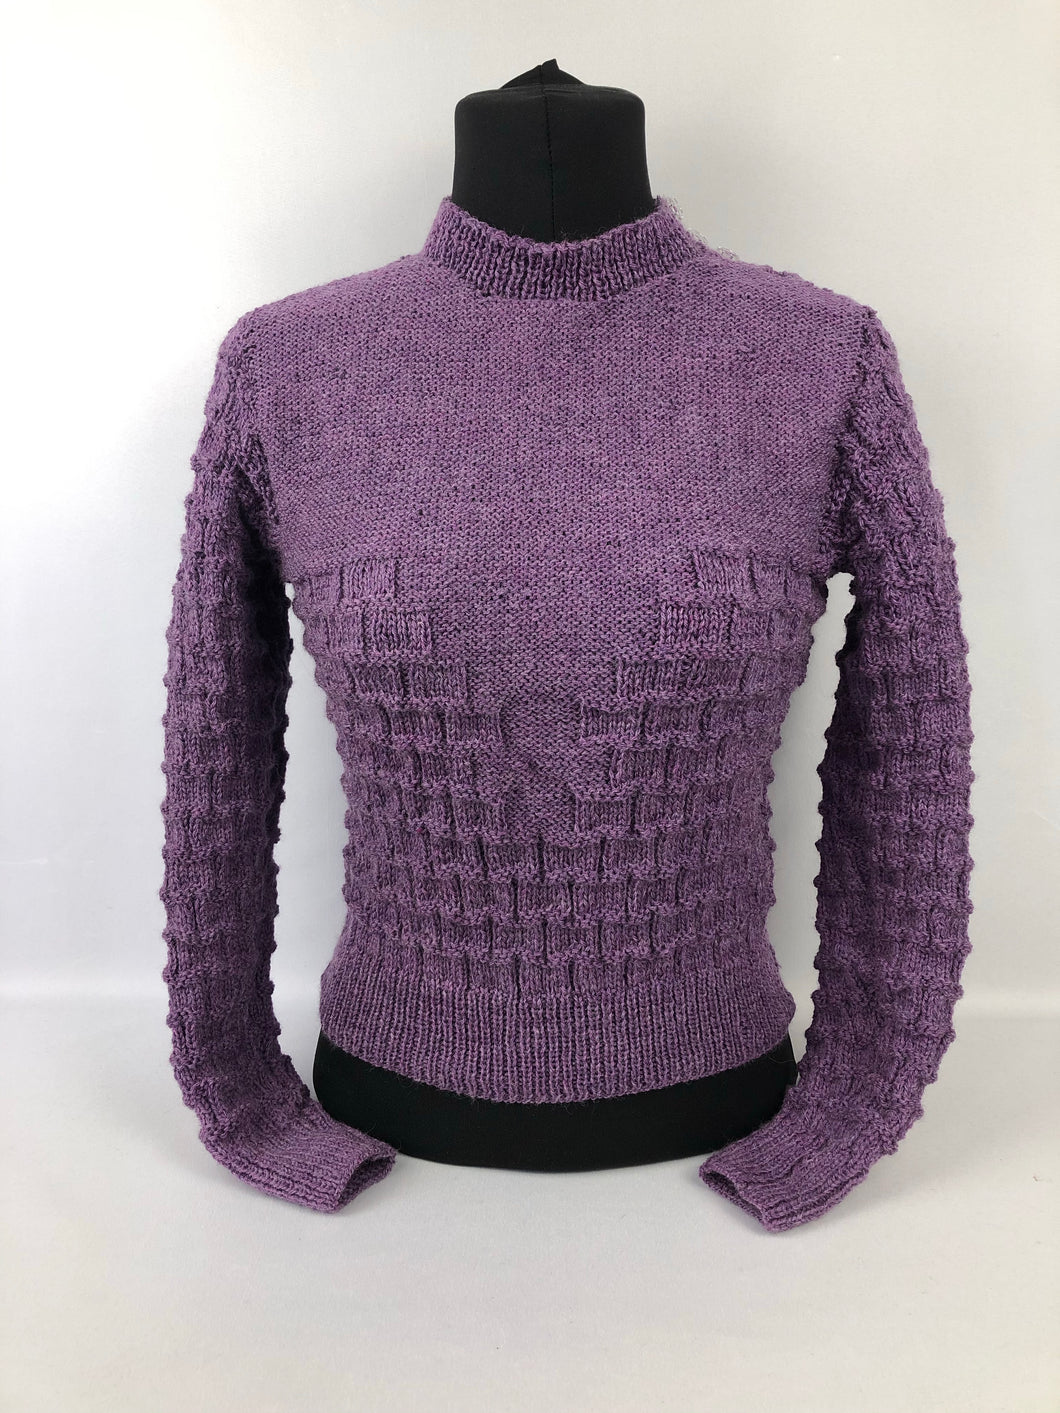 Reproduction 1930s Long Sleeved Jumper - B34 36 38